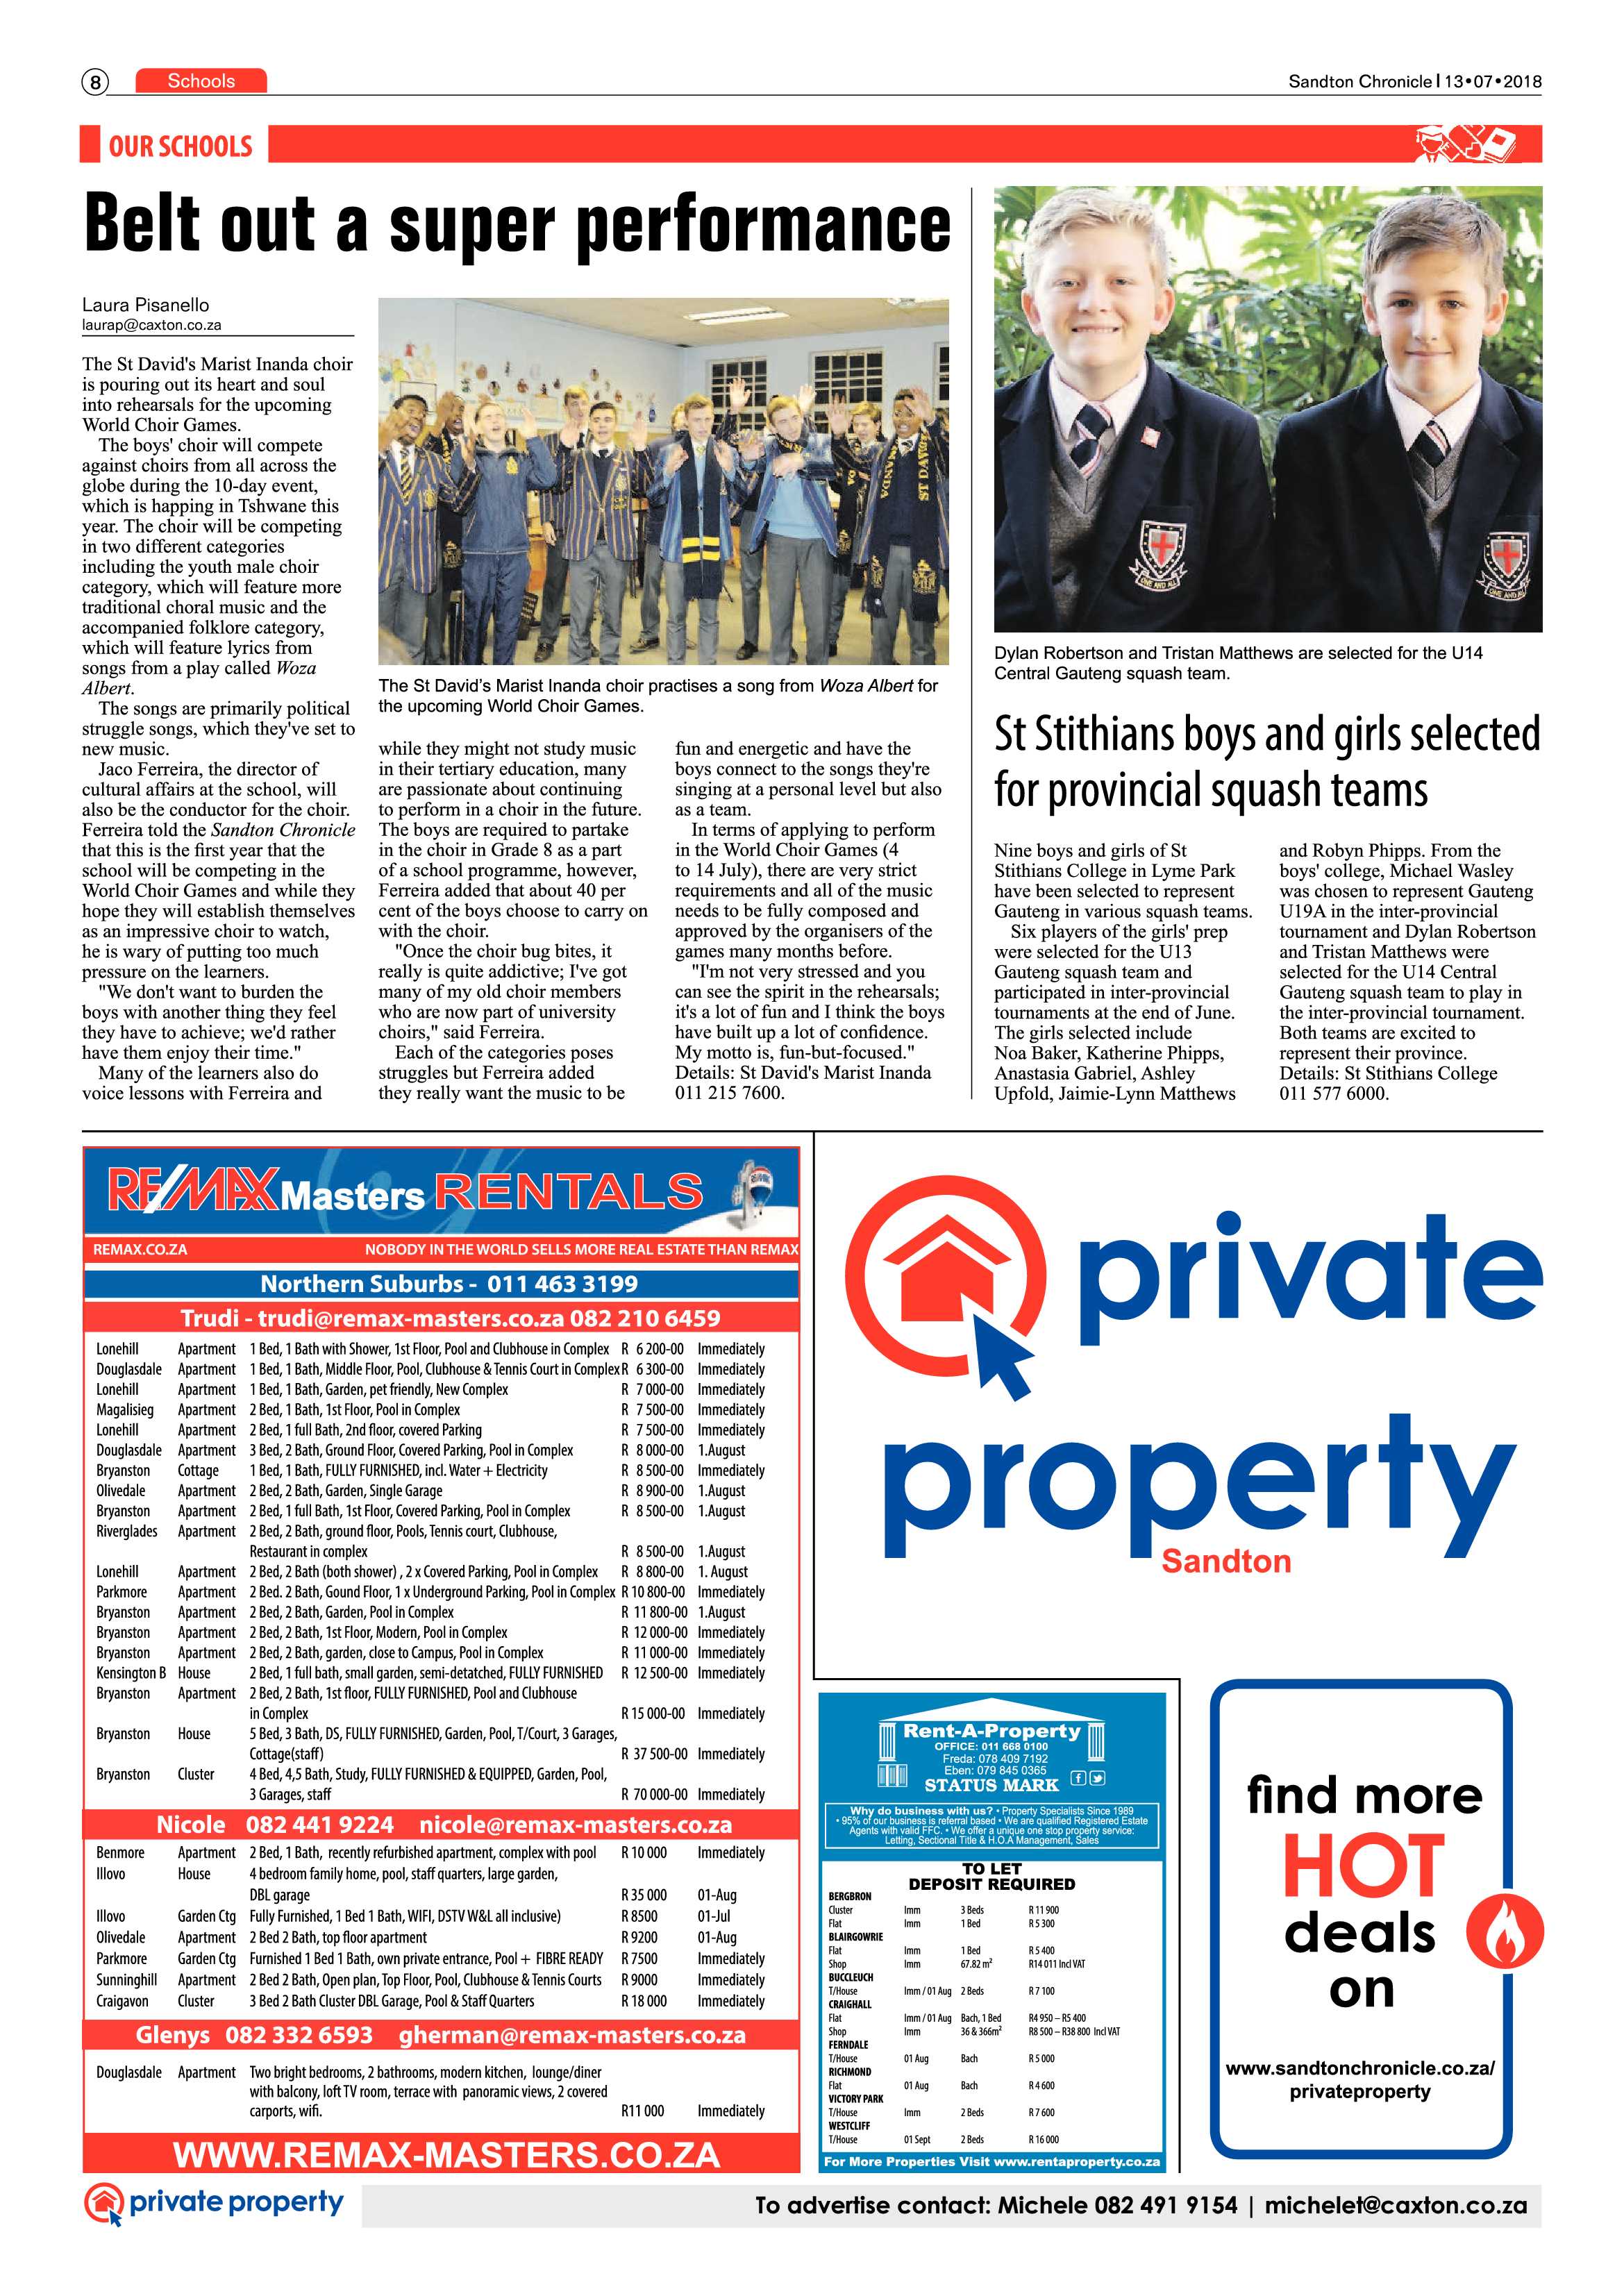 Sandton Chronicle 13 July, 2018 page 8